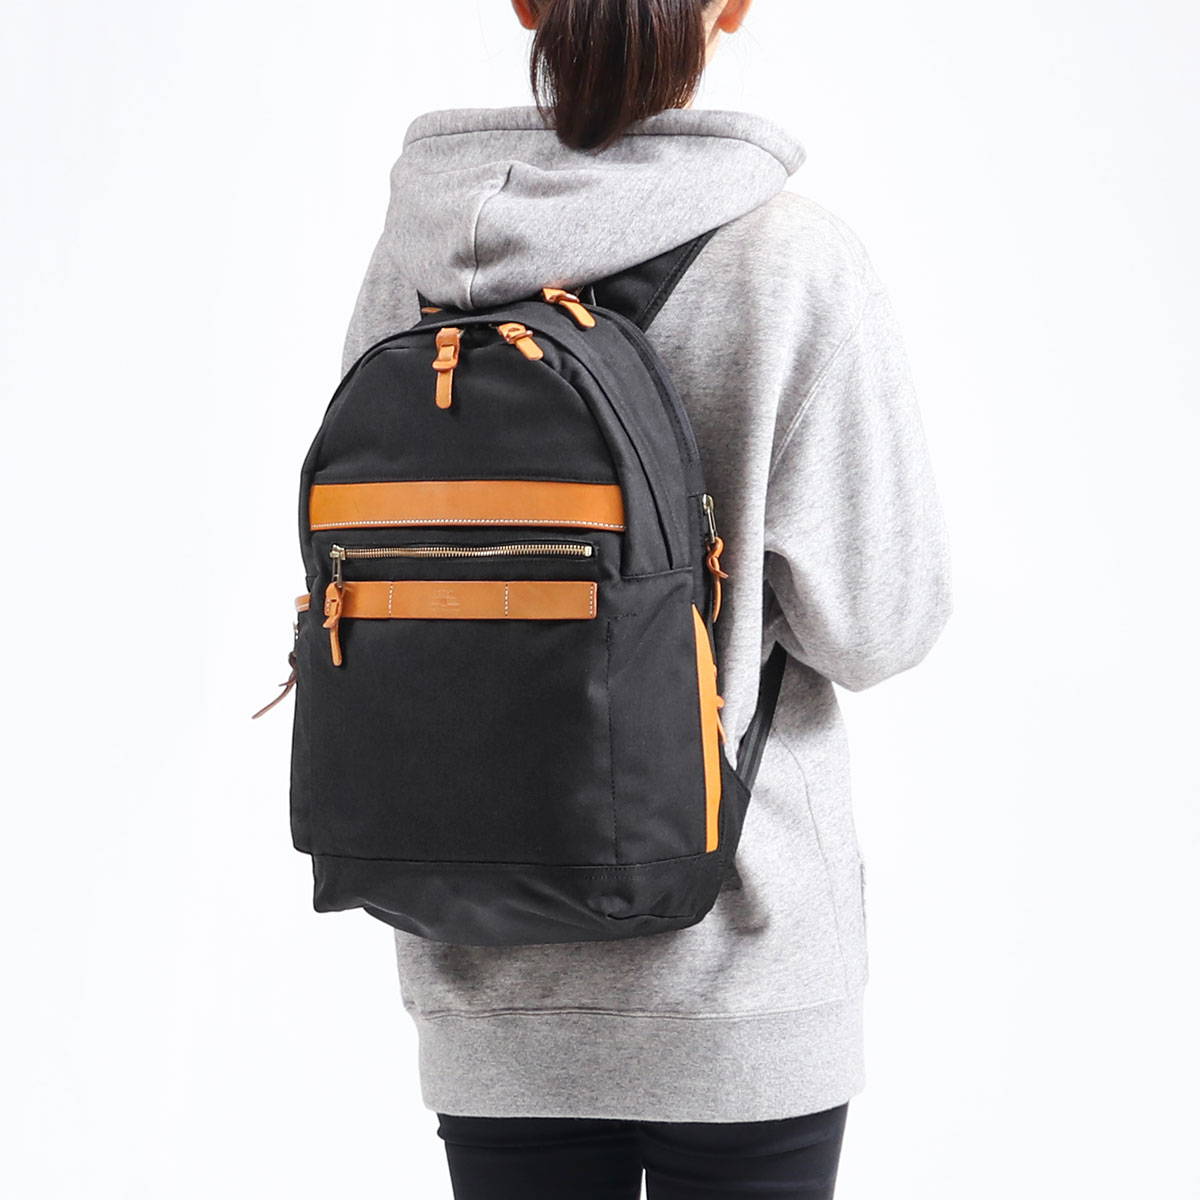 AS2OV アッソブ ATTACHMENT DAY PACK 011920｜【正規販売店】カバン ...